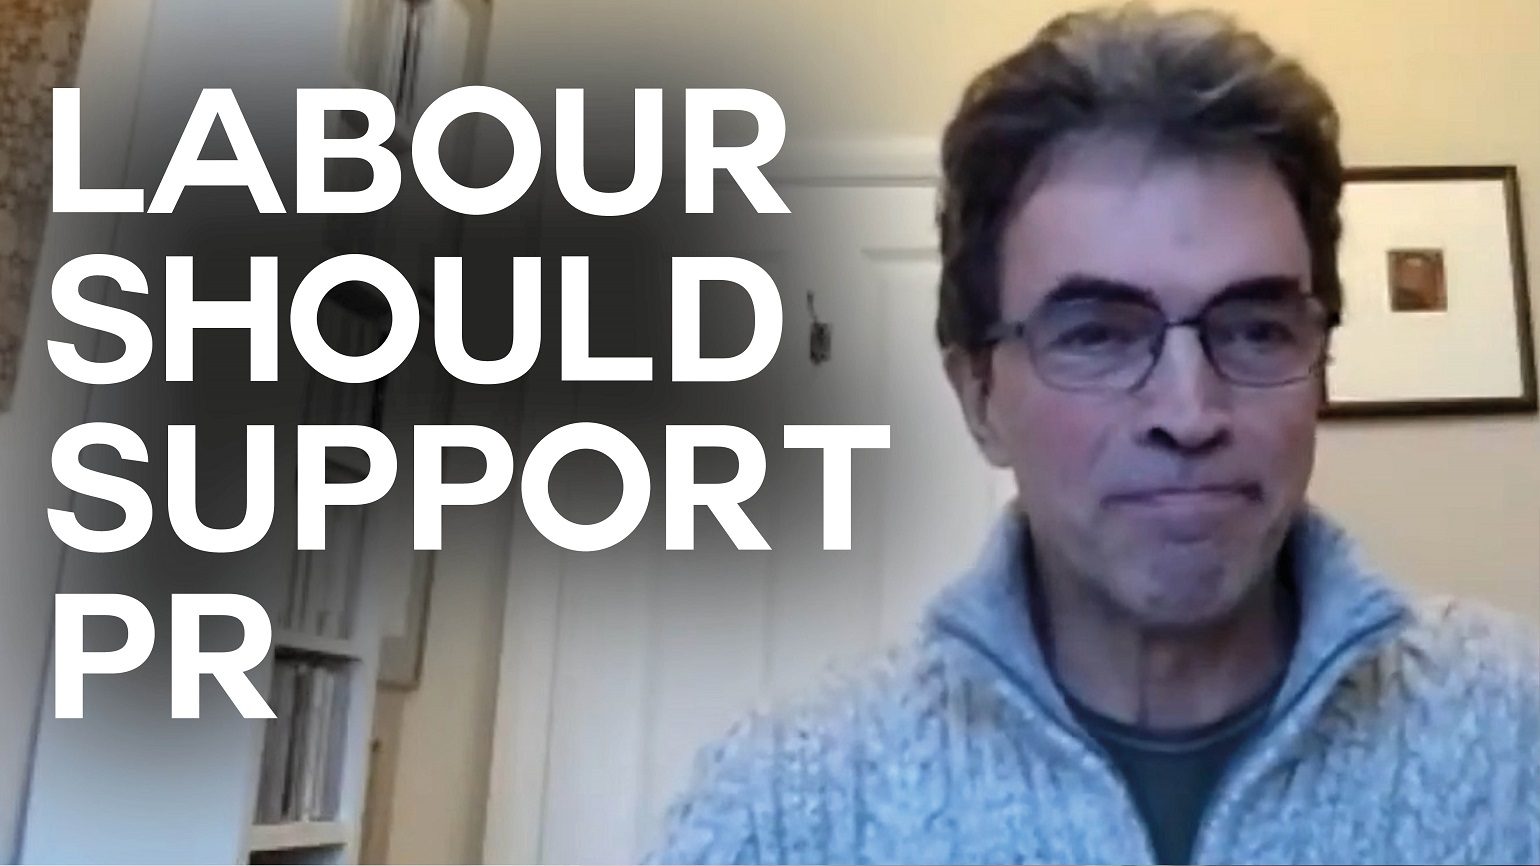 A still of an interview with Unlock Democracy director Tom Brake with text reading "Labour should support PR"